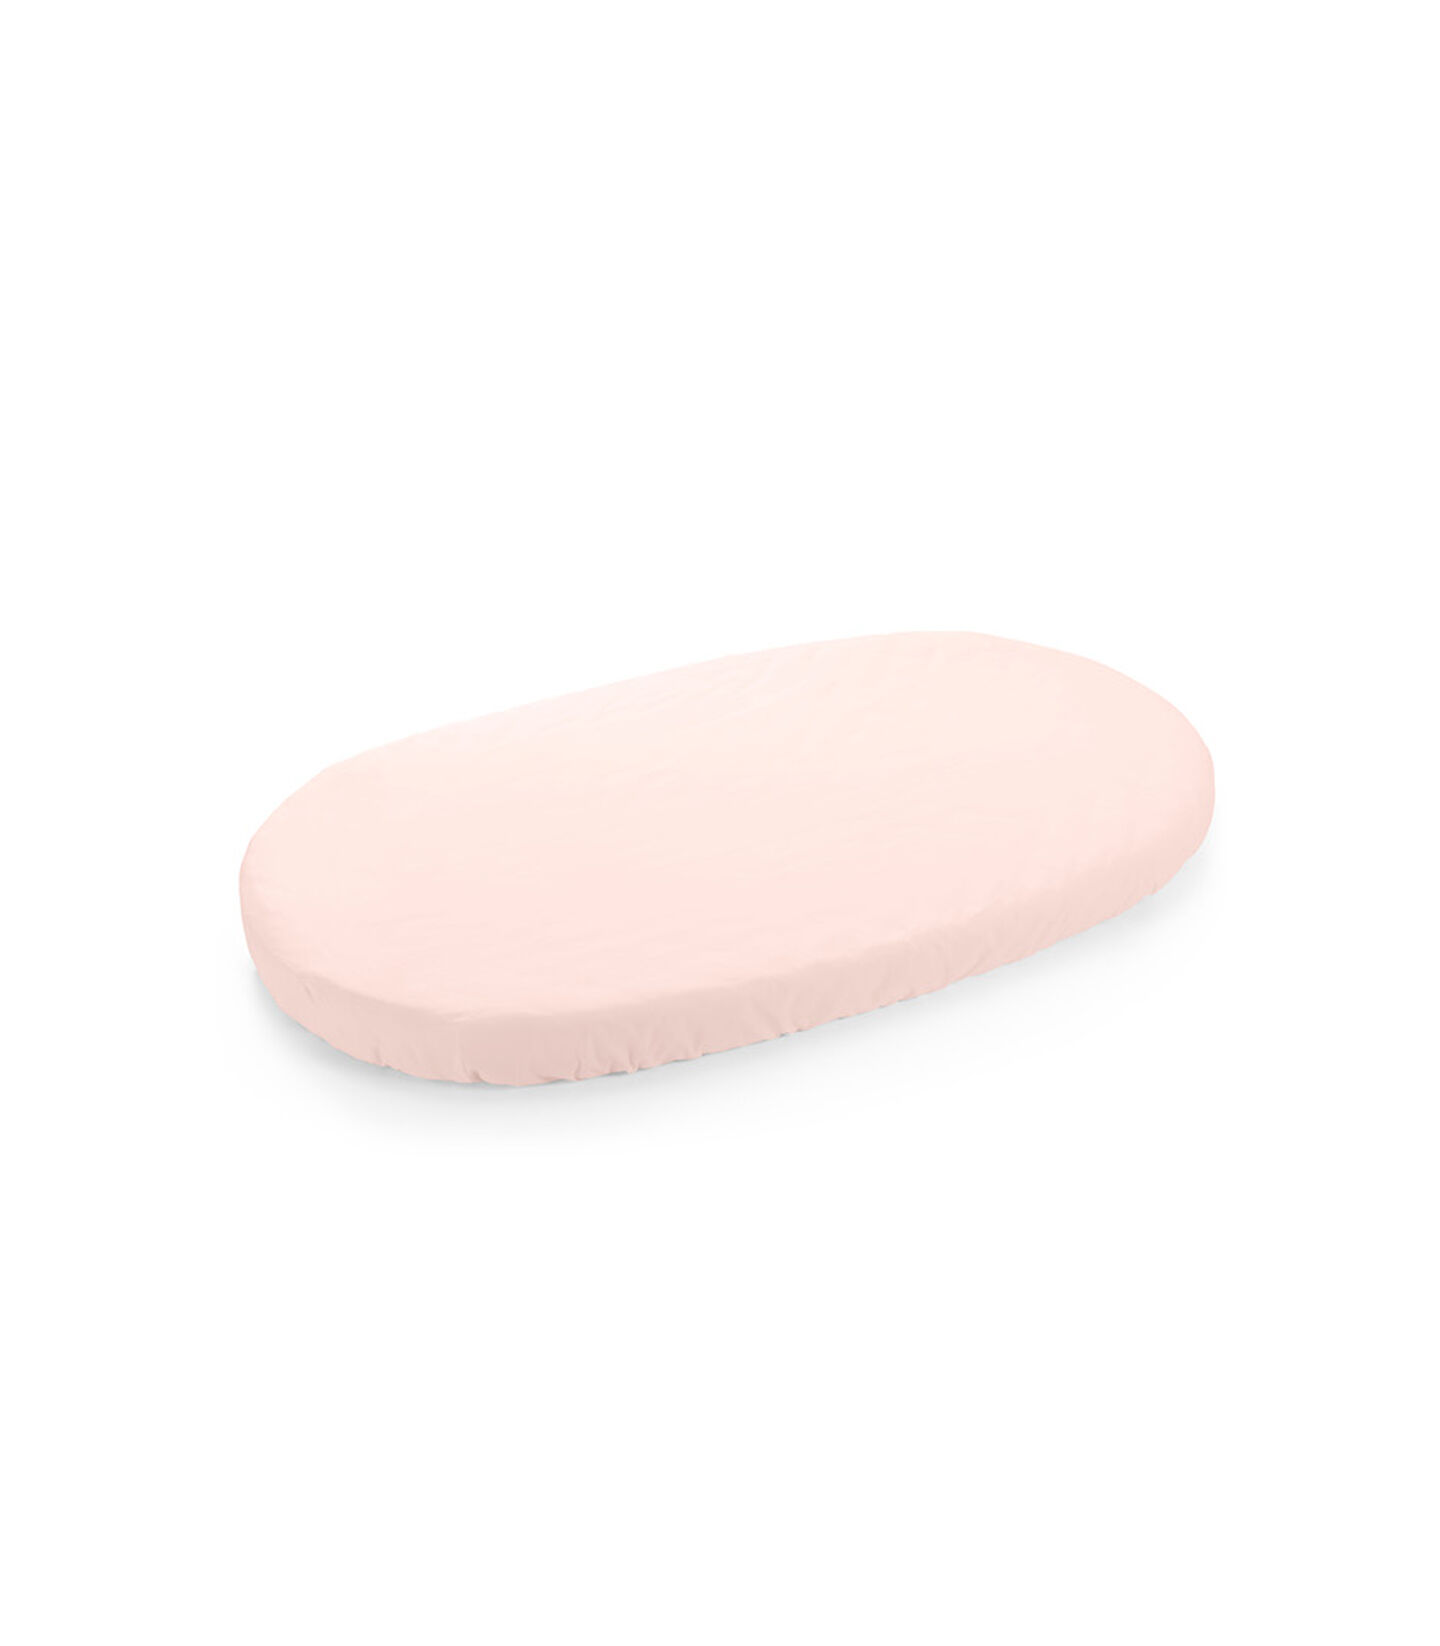 Stokke® Sleepi™ Fitted Sheet Pink, Peachy Pink, mainview view 1